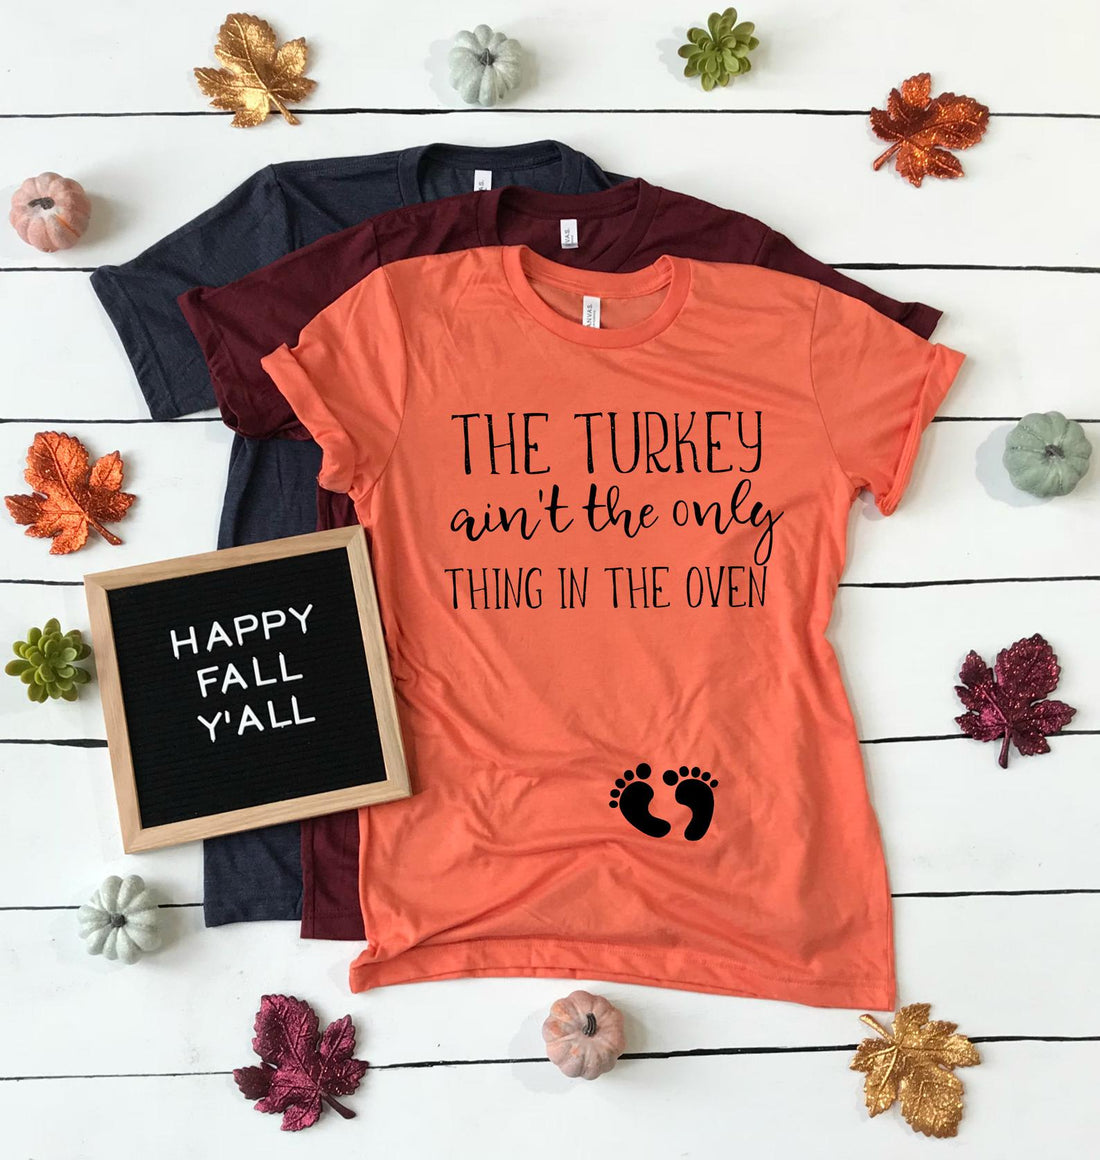 Planning On Revealing Your Pregnancy On Thanksgiving? Mama, We Got You.